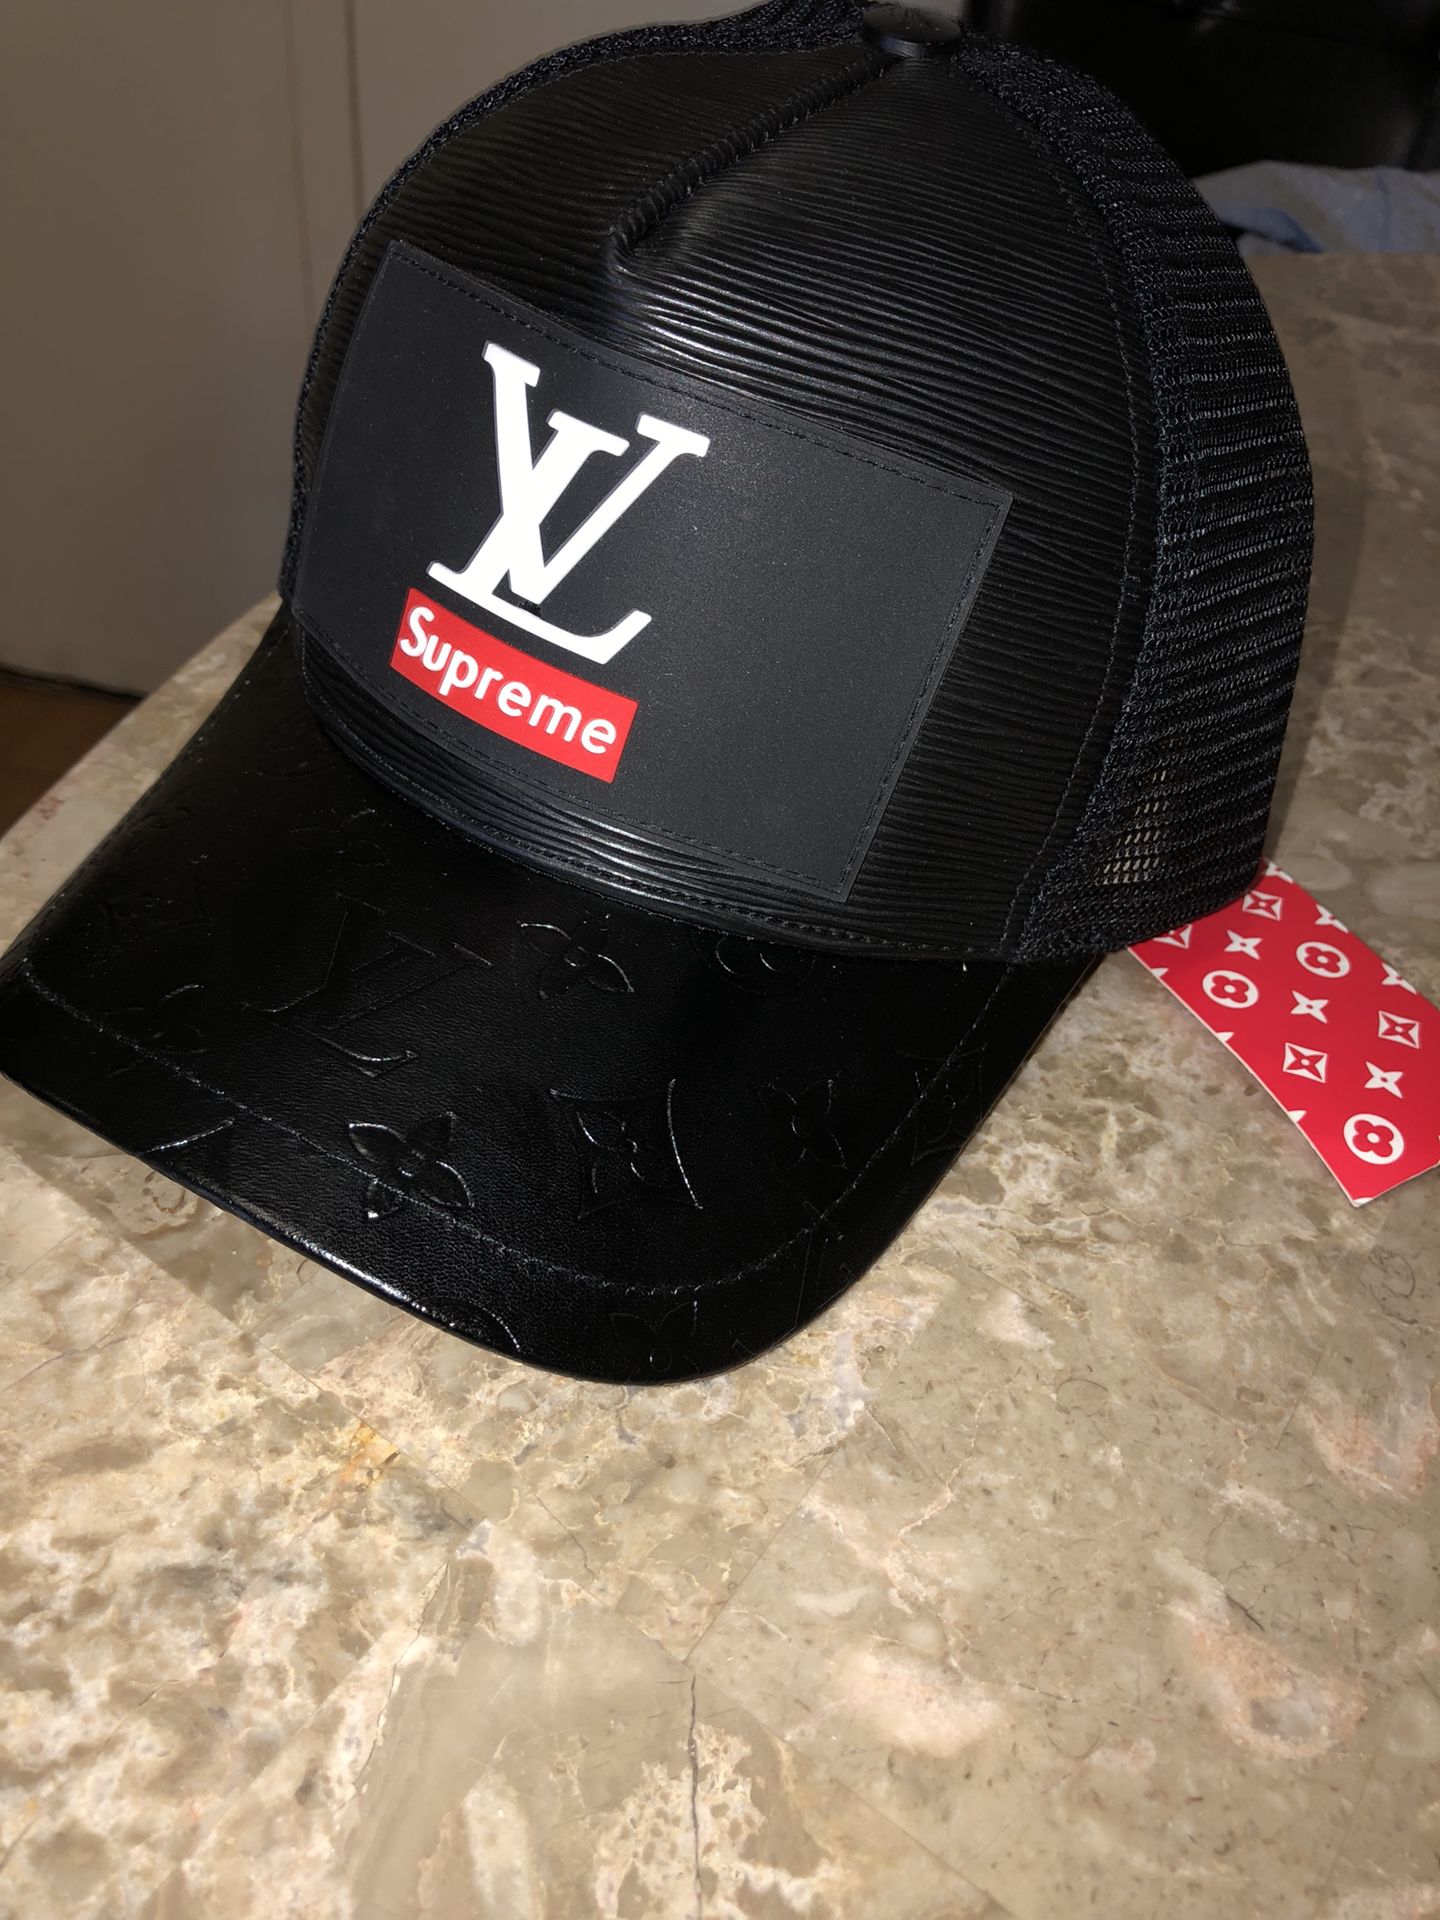 Supreme x Louis Vuitton hat for Sale in OLD RVR-WNFRE, TX - OfferUp